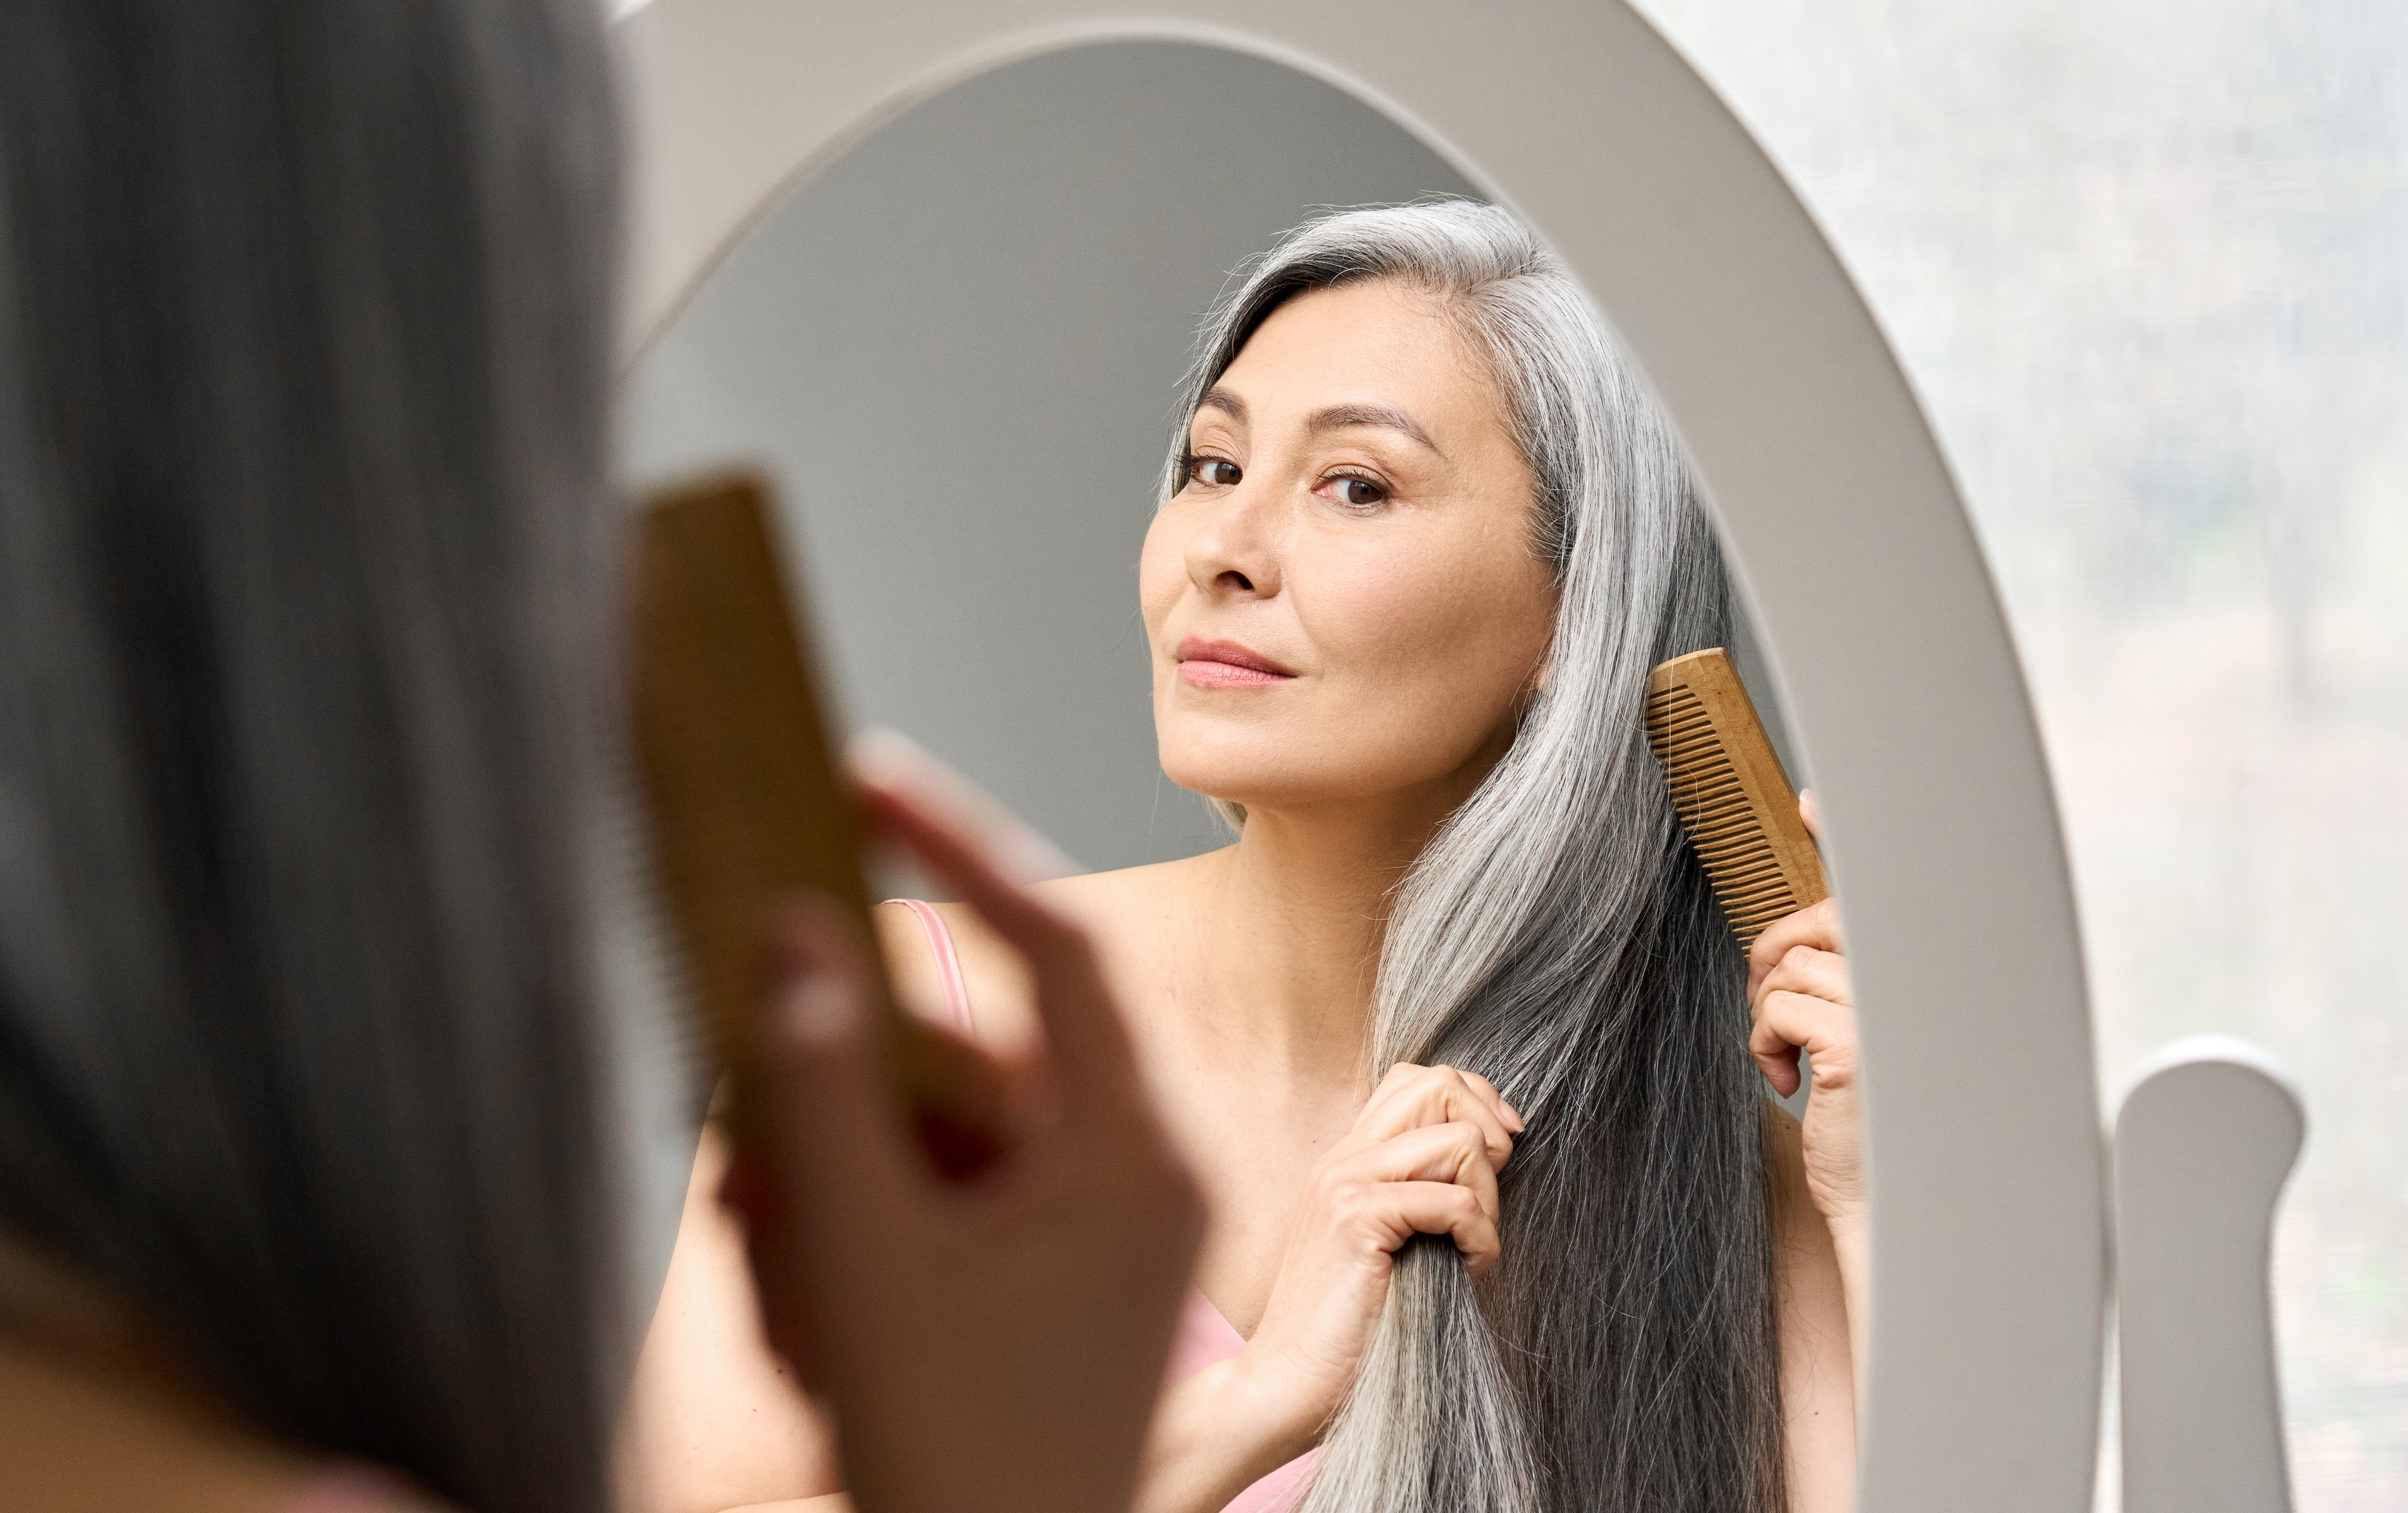 Gray-haired woman combing her hair. | Source: Shutterstock